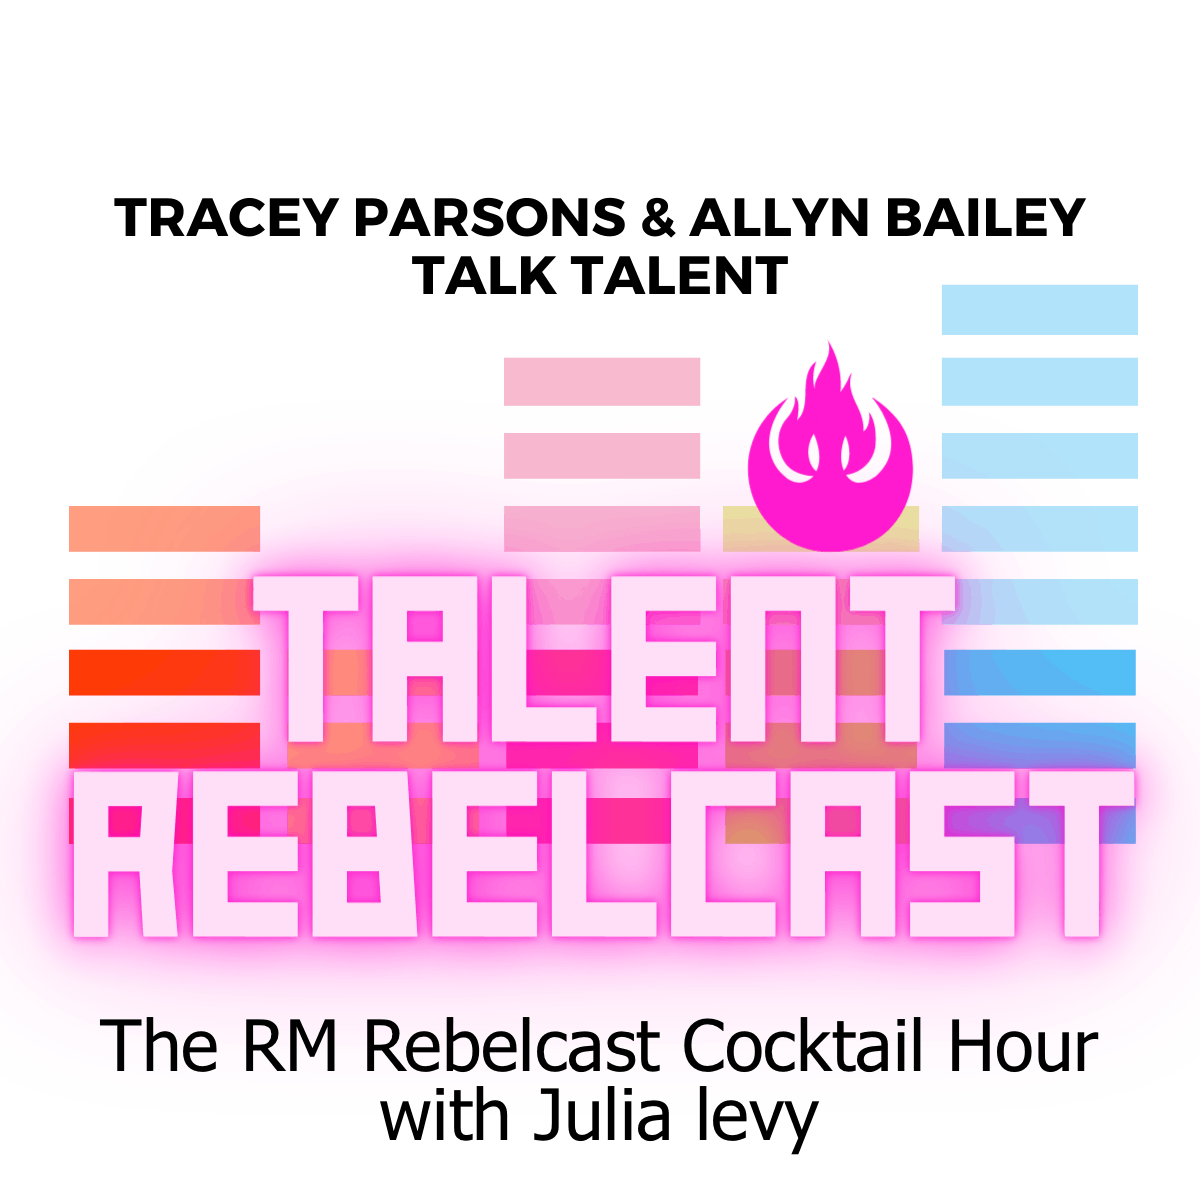 The RM Rebelcast Cocktail Hour with Julia levy